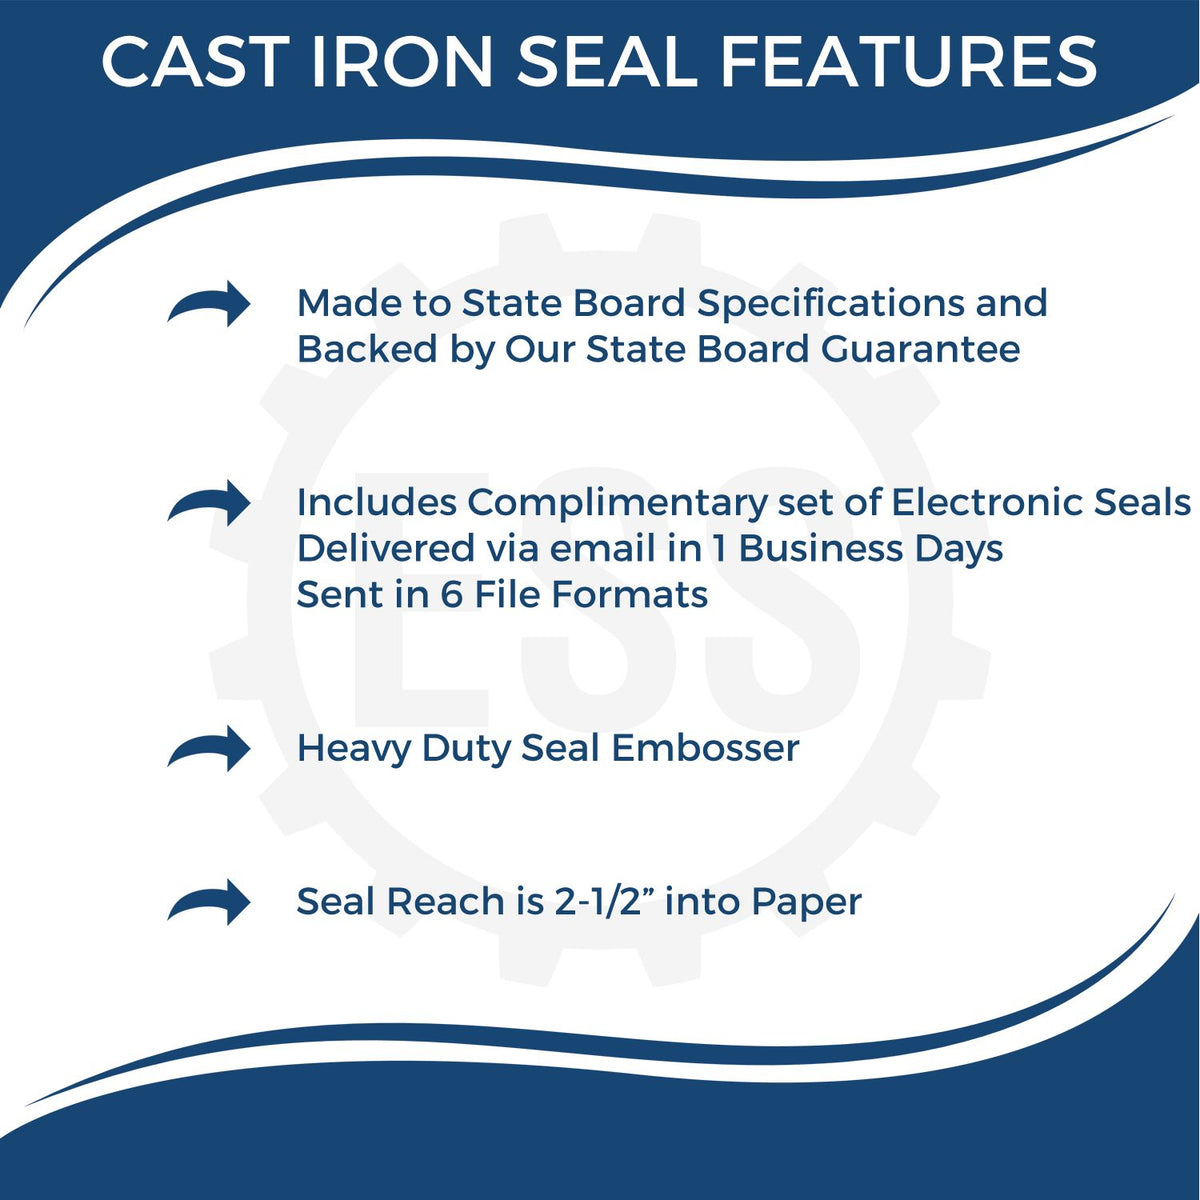 A picture of an infographic highlighting the selling points for the Heavy Duty Cast Iron South Carolina Geologist Seal Embosser